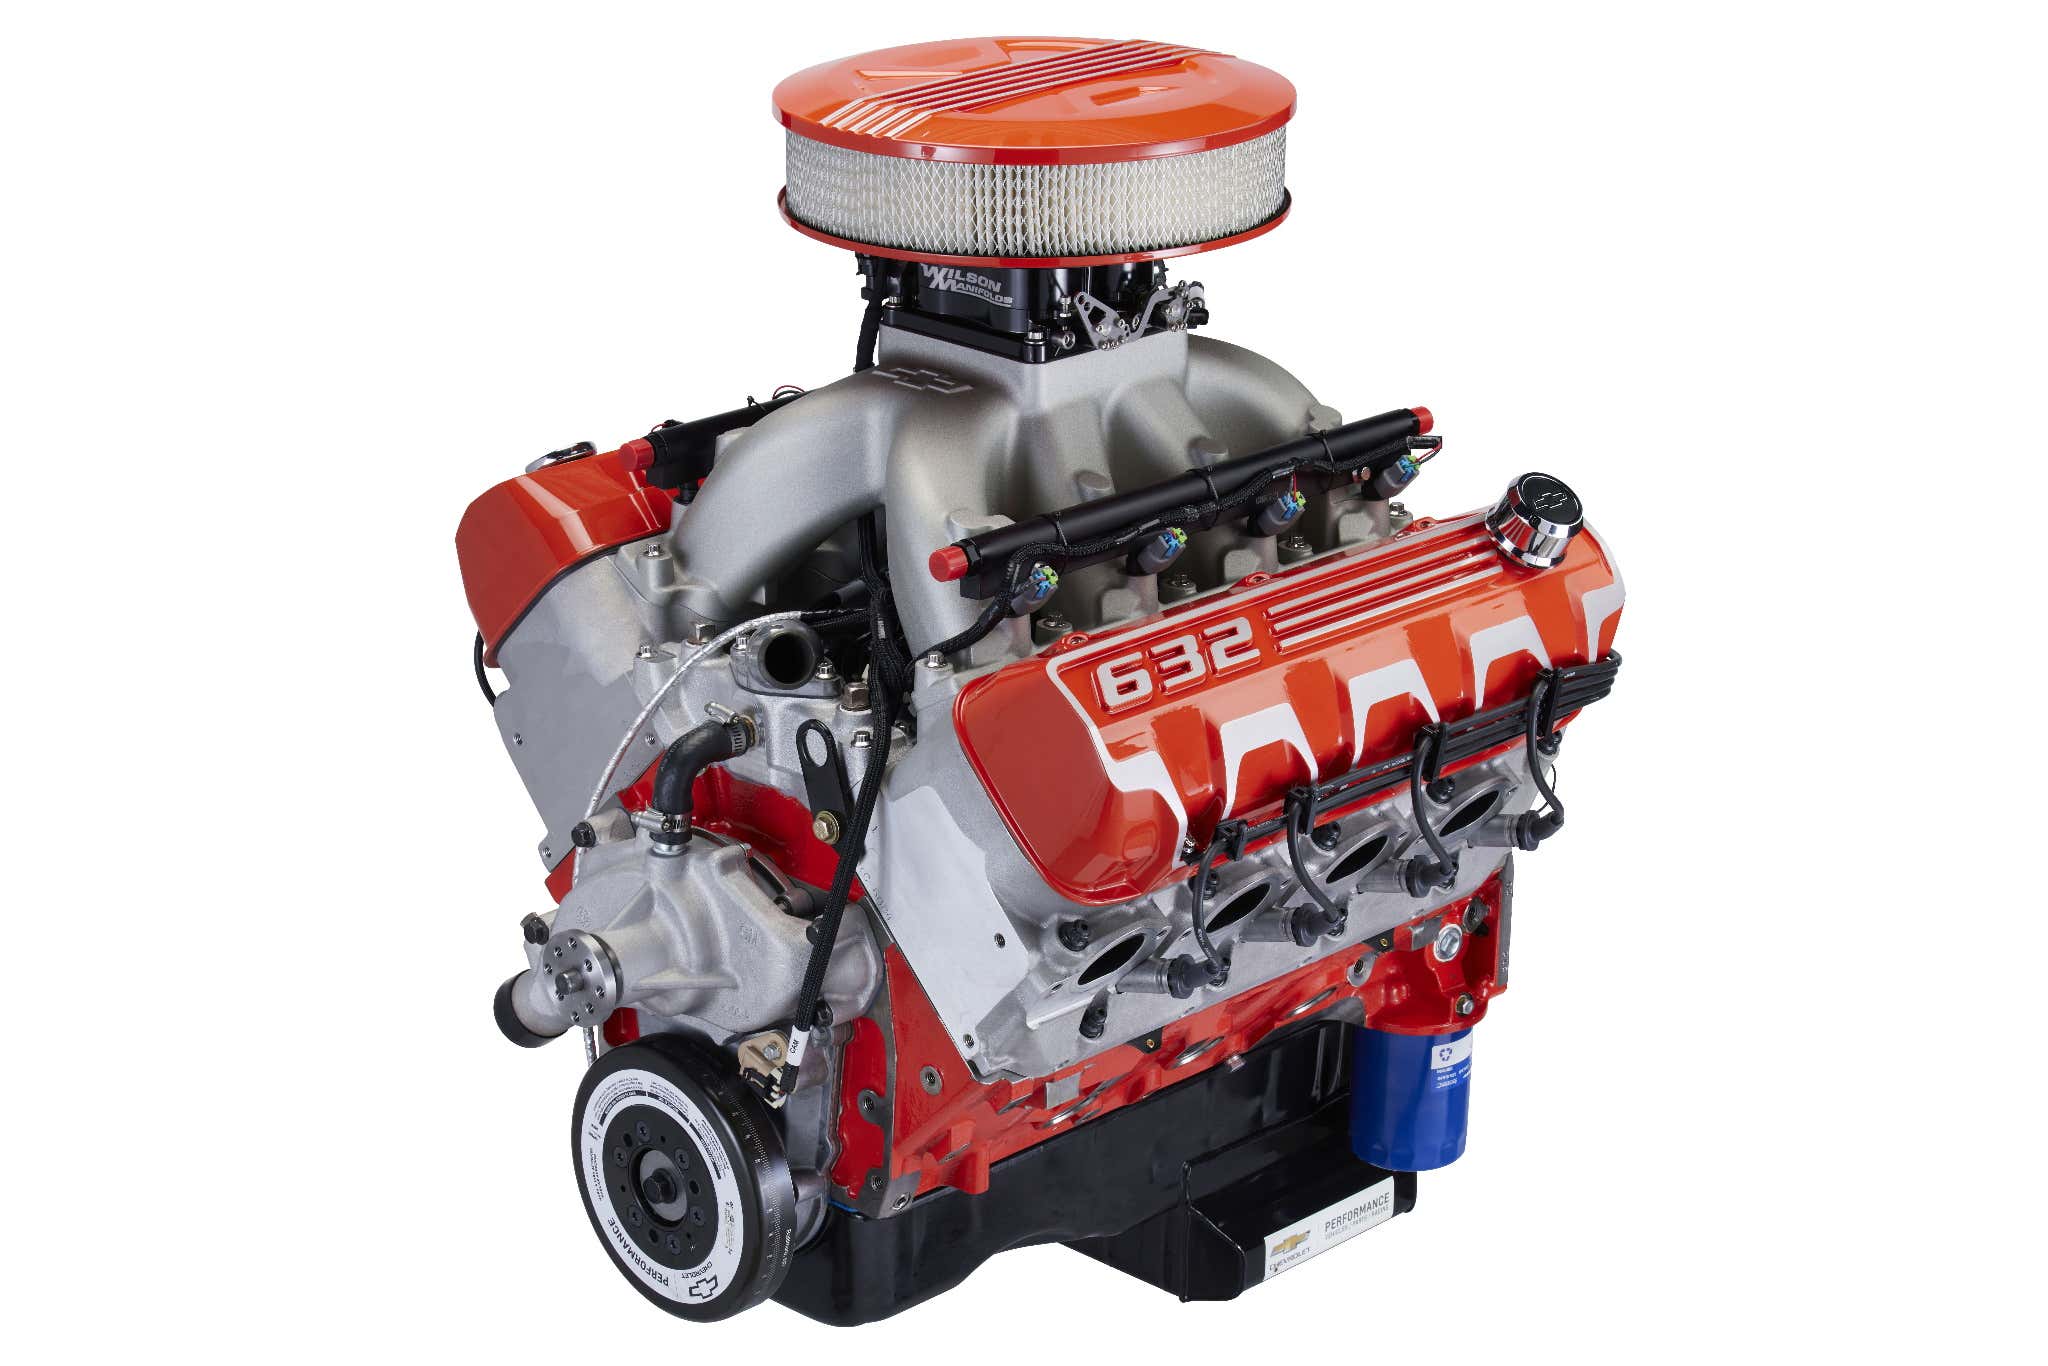 ZZ632 Crate Engine Price: 1004 HP Motor Costs More Than Hellephant V8